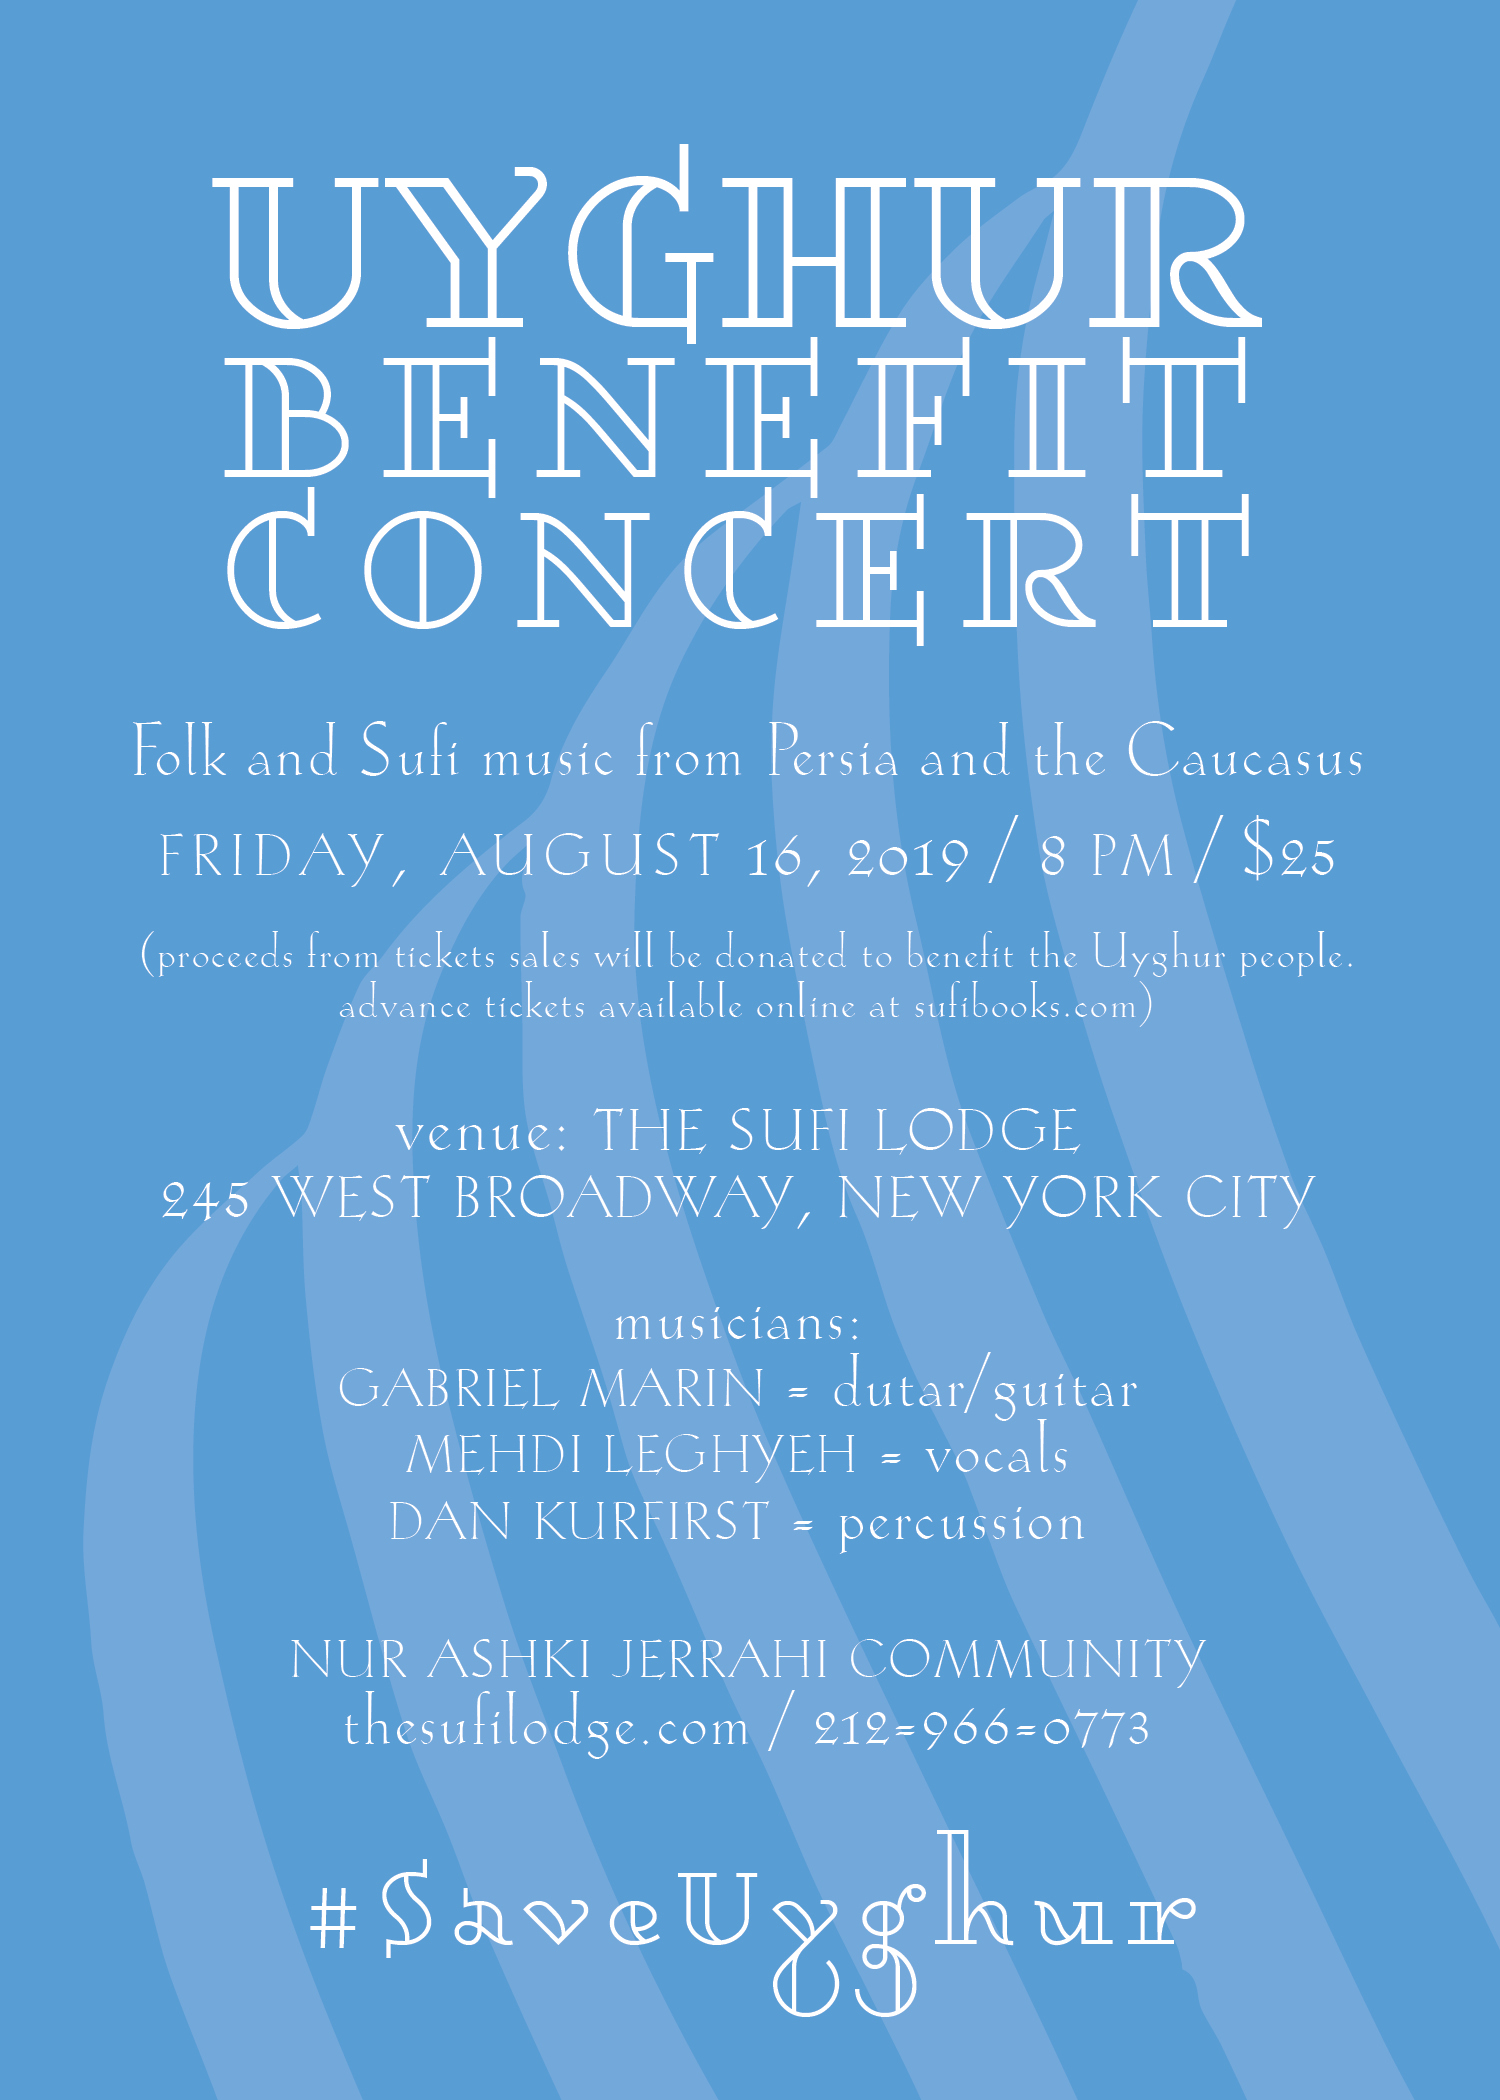 Friday, August 16, 2019 | Uyghur Benefit Concert: Folk and Sufi music from Persia and the Caucasus | 8 pm | $25